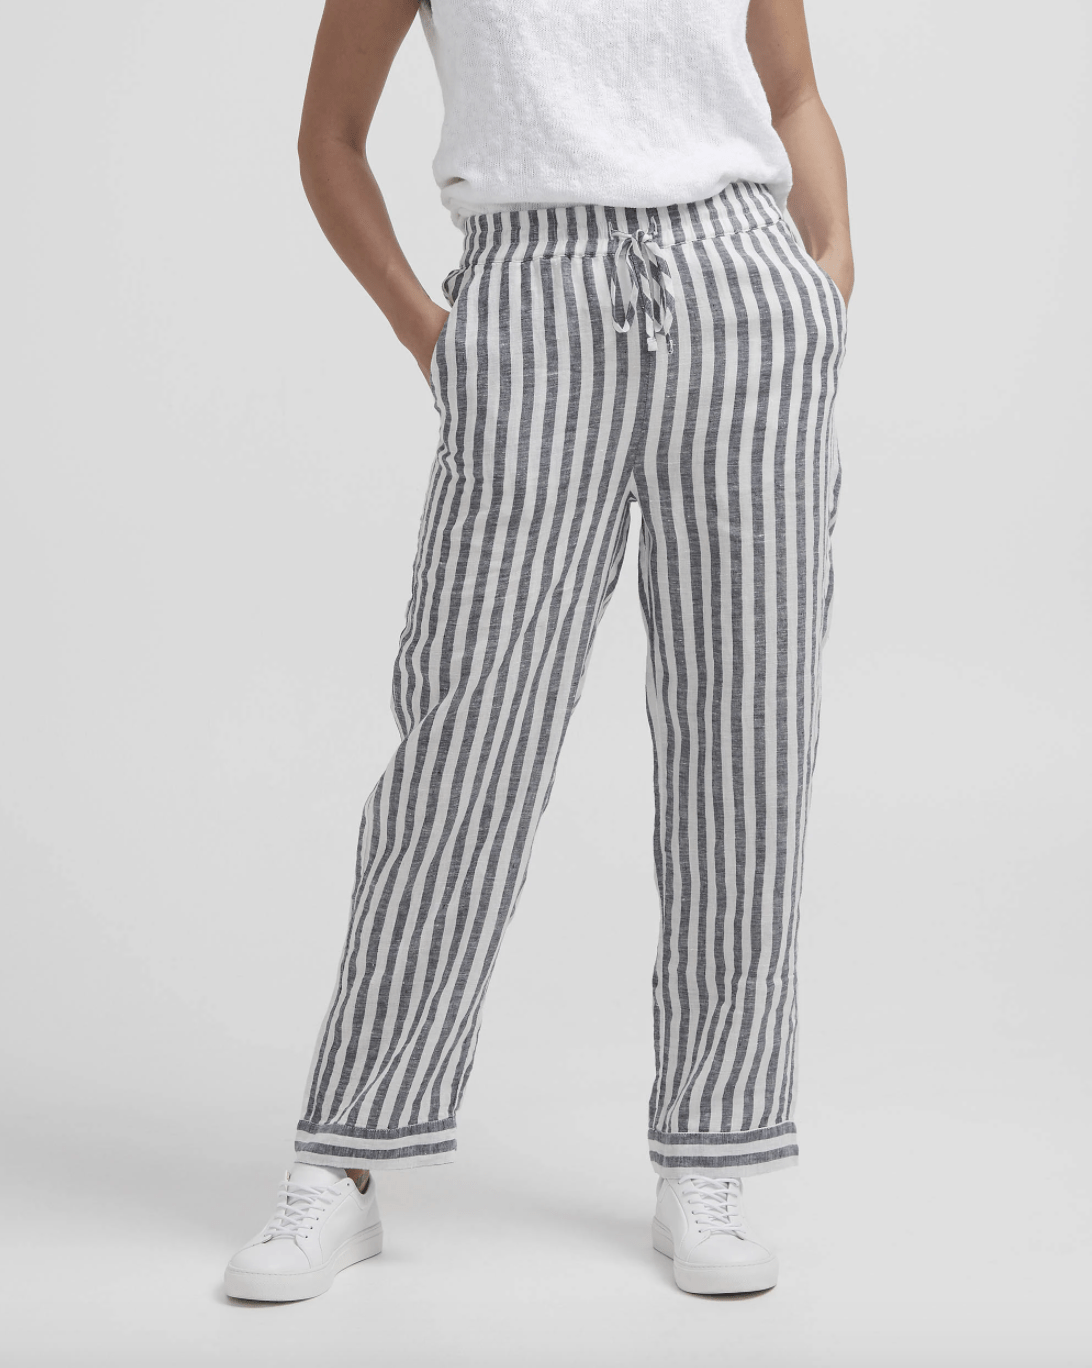  Navy and White Holebrook, Women's Solina Trouser (White)